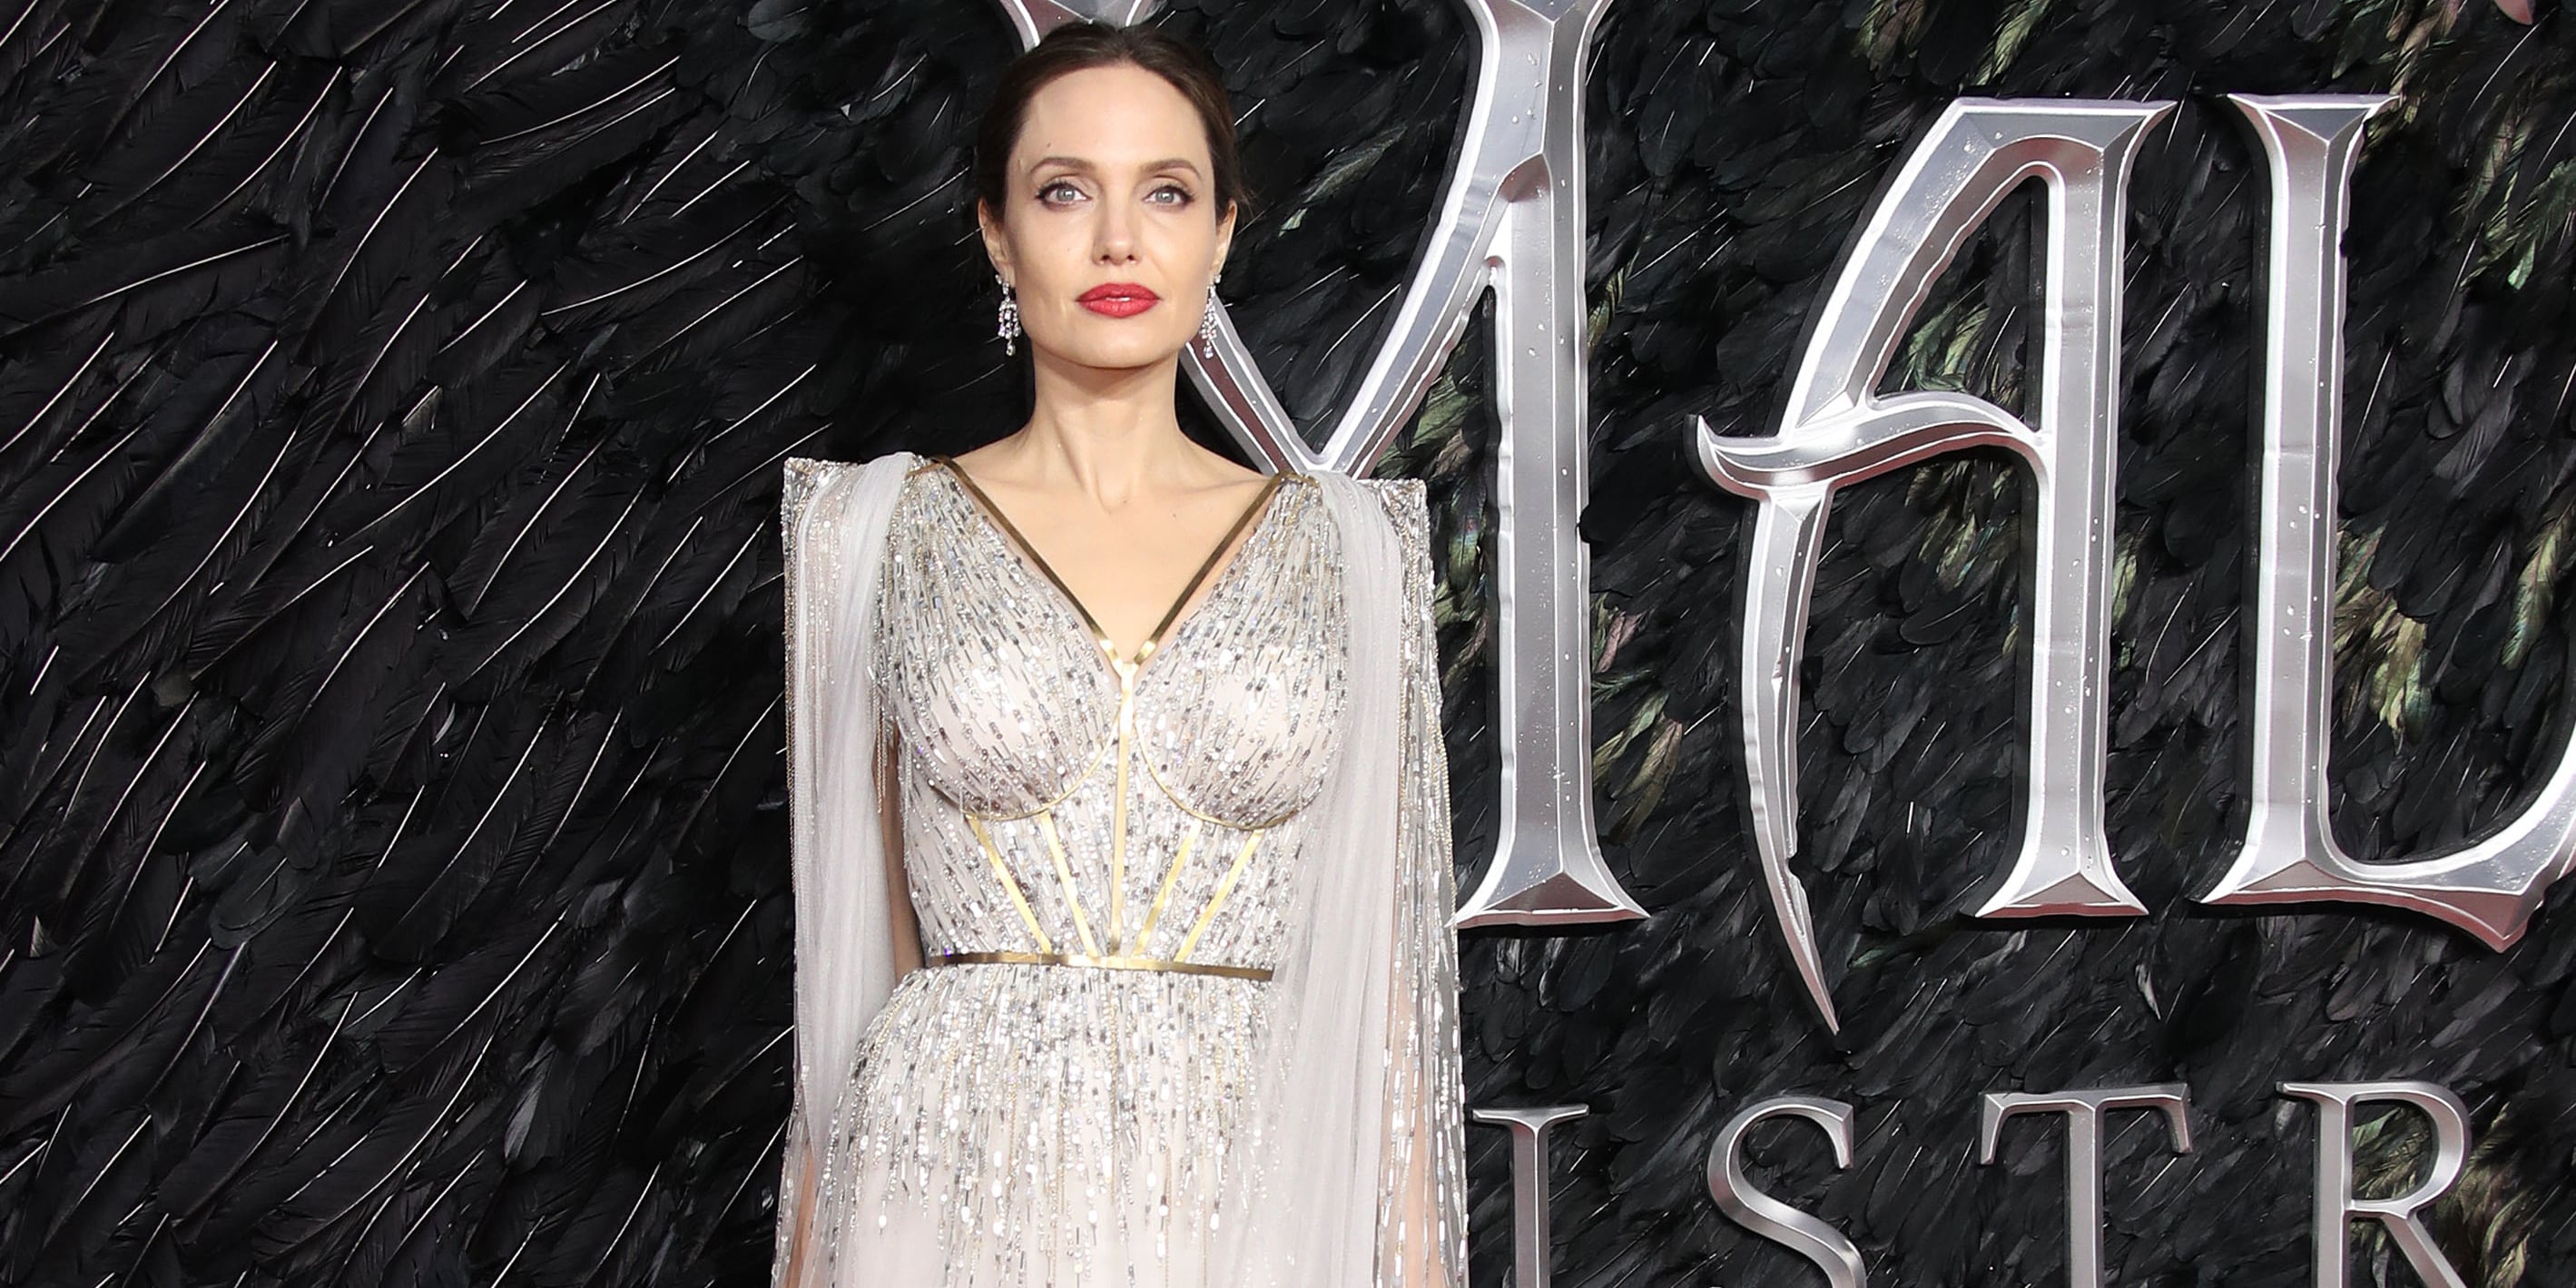 All About the Bump: Angelina Jolie, queen of the maxi-dress